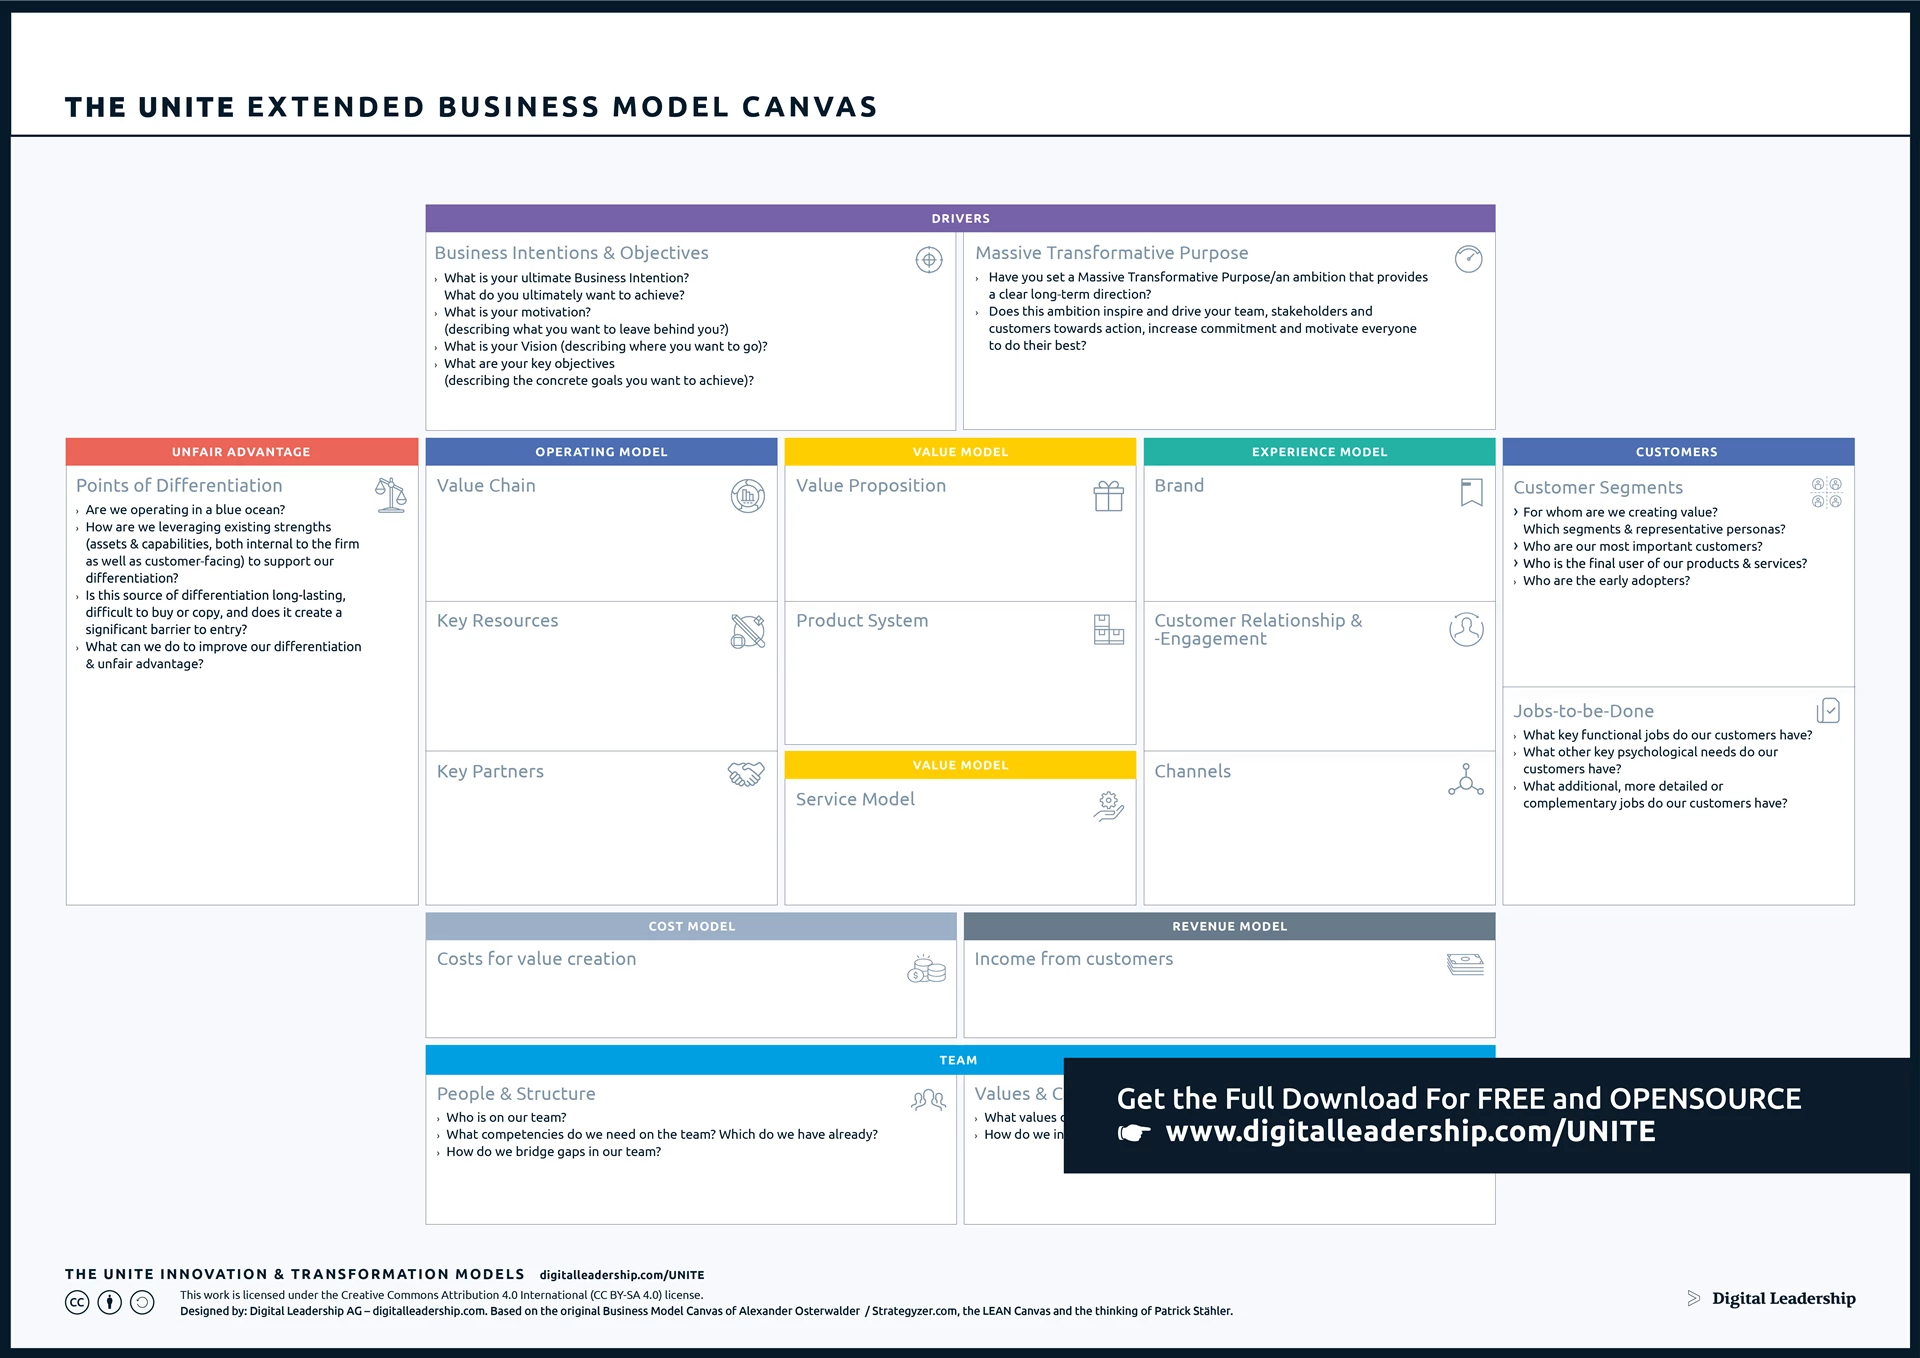 eXtended Business Model Canvas